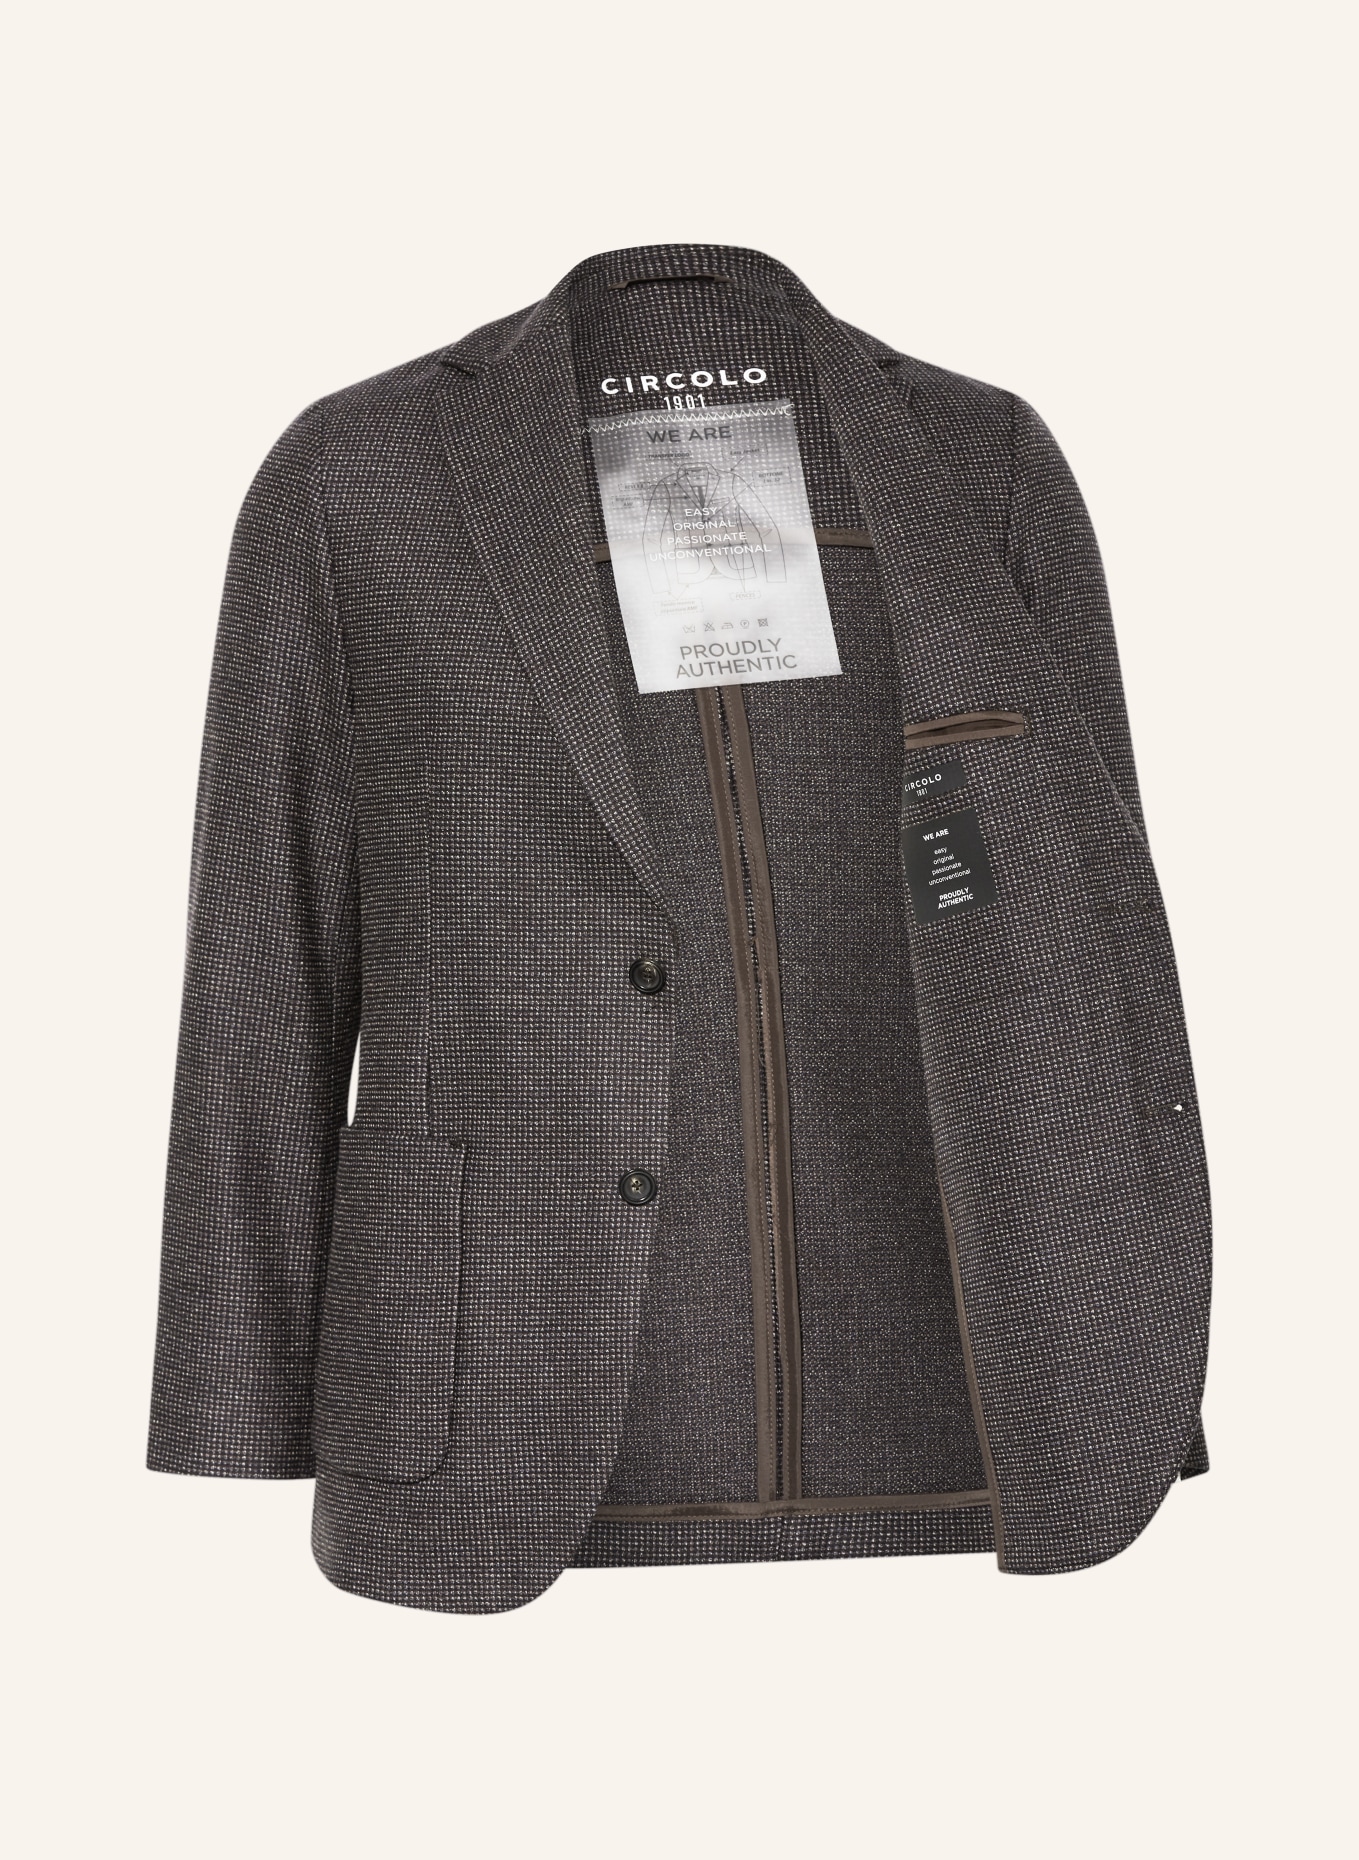 CIRCOLO 1901 Tailored jacket extra slim fit, Color: DARK BROWN/ BROWN/ BEIGE (Image 4)